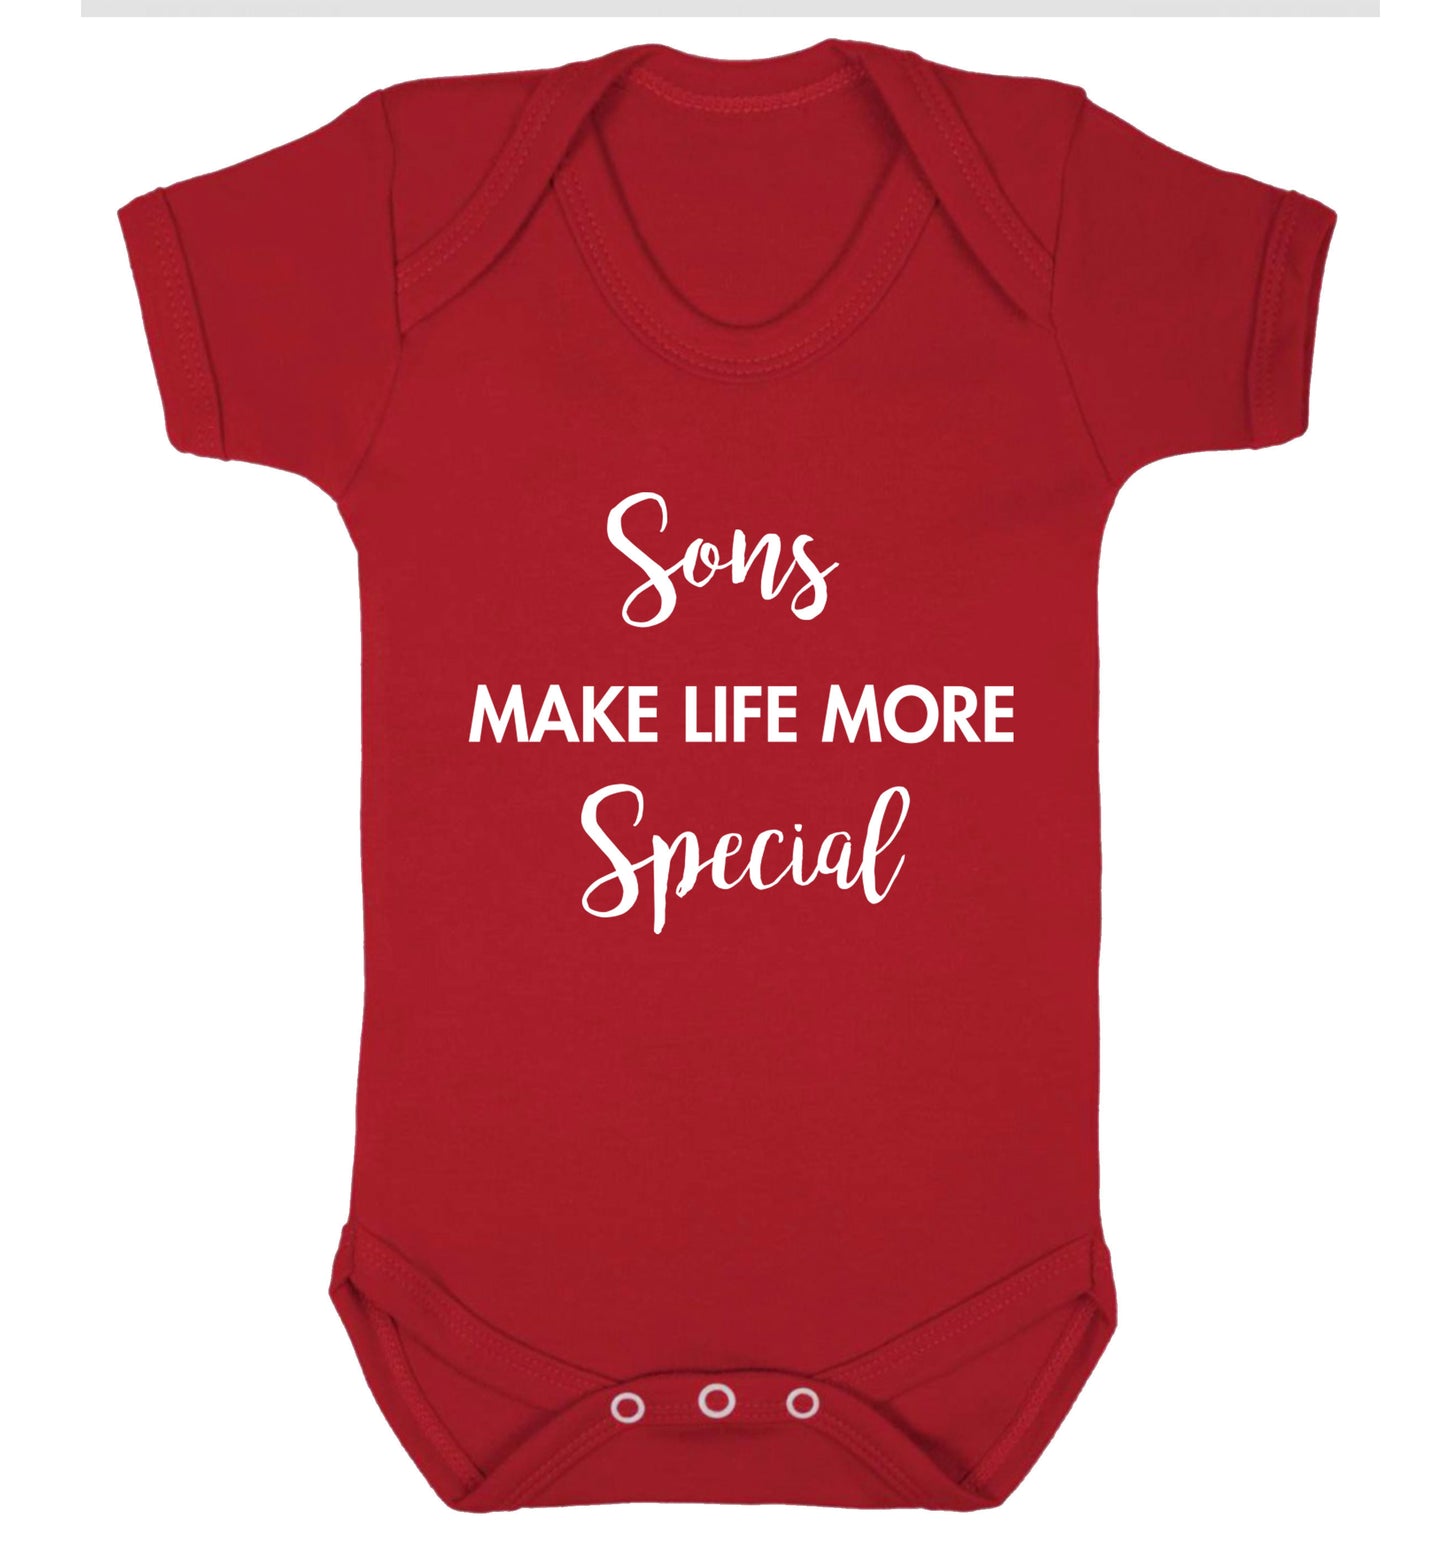 Sons make life more special Baby Vest red 18-24 months